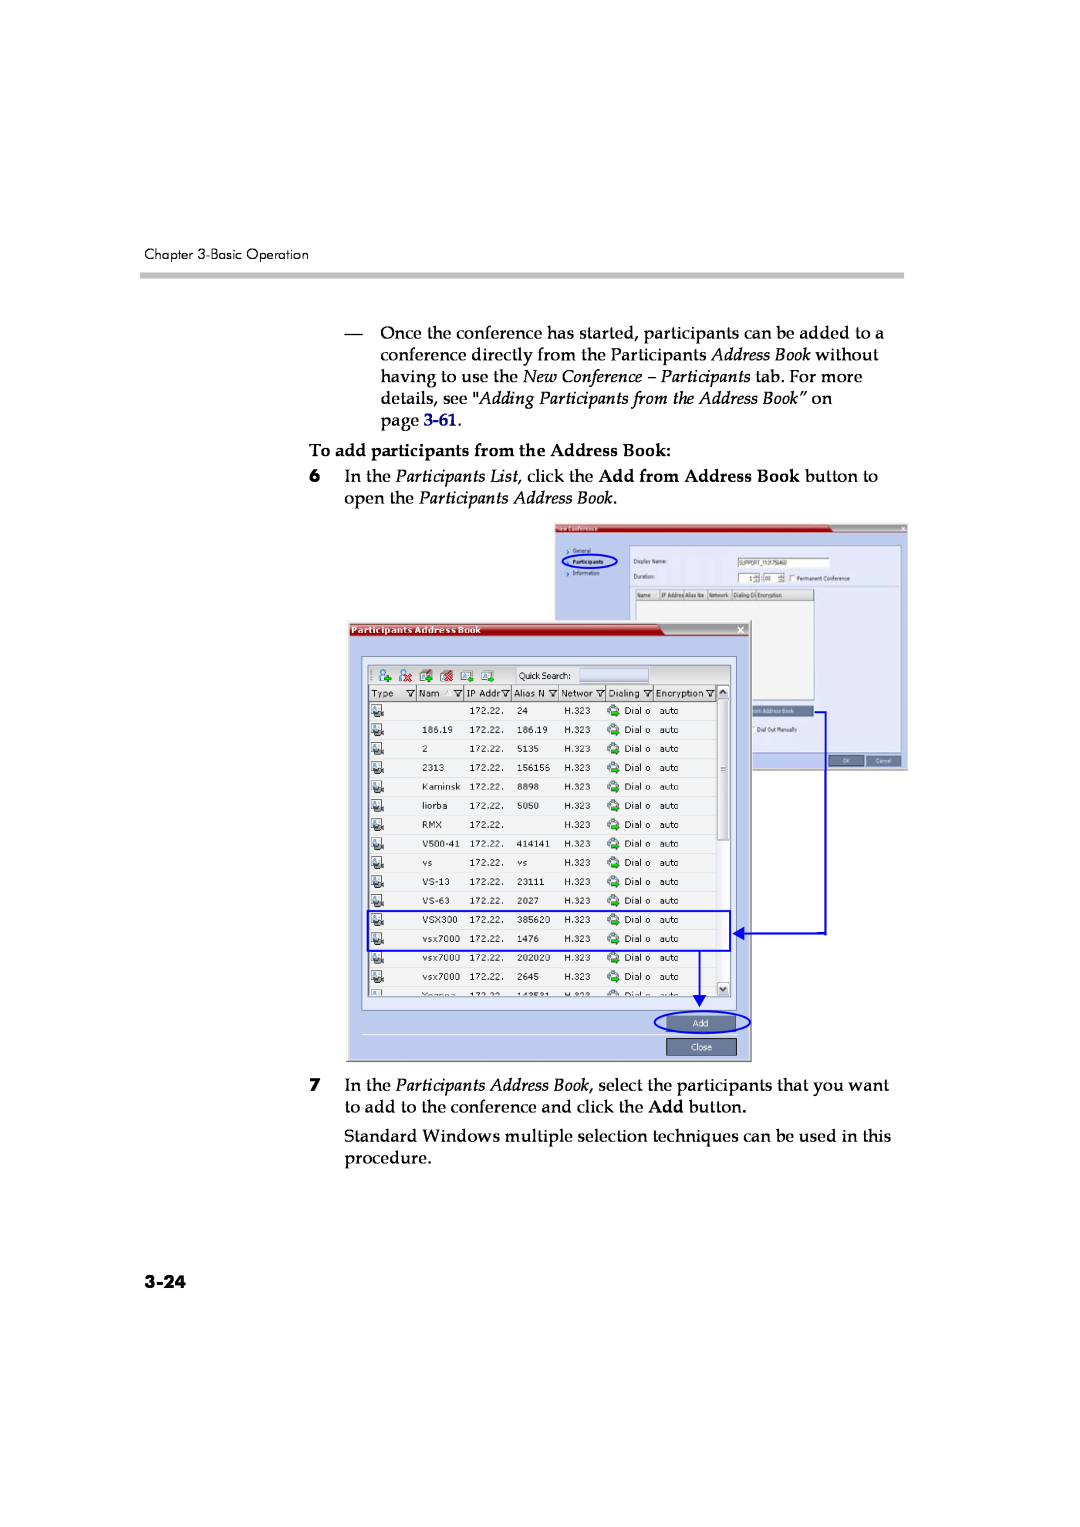 Polycom DOC2560A manual To add participants from the Address Book, 3-24 